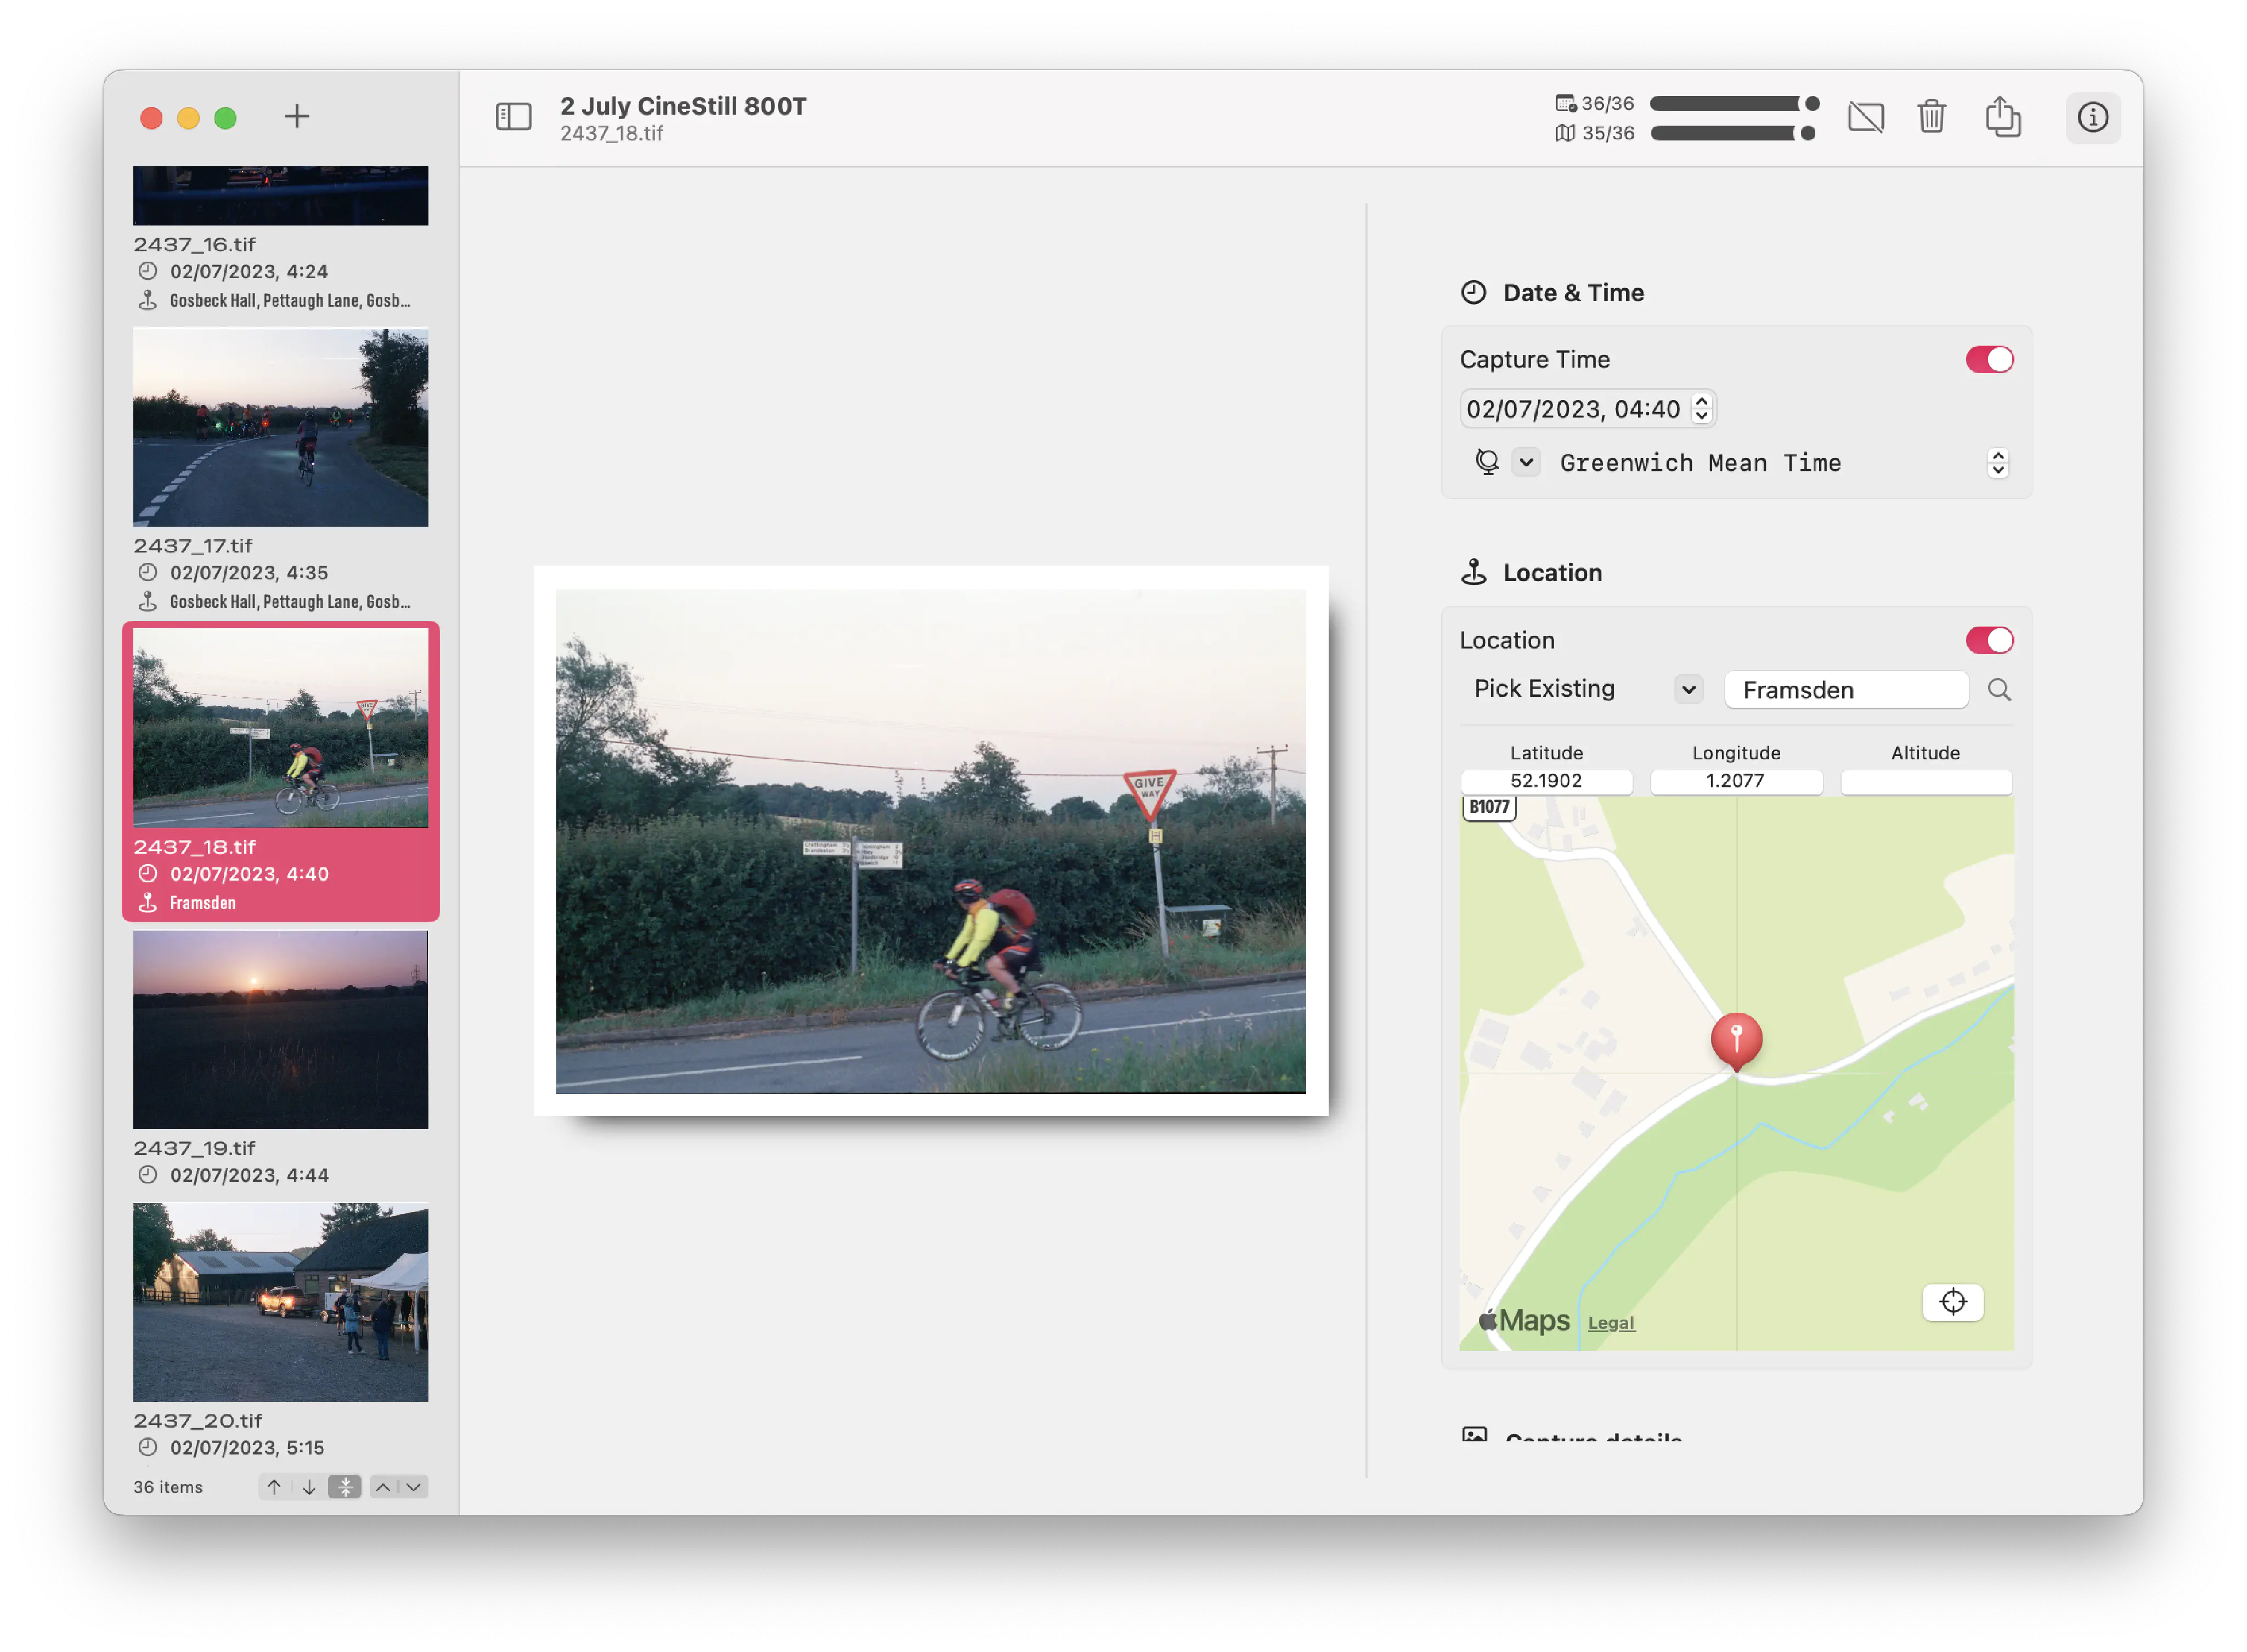 A screenshot of a Mac app called “Unspool”, showing a two-pane sidebar-detail layout in a document called “2 July CineStill 800T”. In the sidebar are images, with their filenames, and dates and locations, along with an “Overview” option, and controls for sorting the images (which are of cyclists at dawn and a pickup truck in the morning light.) In the detail pane, the image is shown with a white border suggesting a print, alongside controls allowing the app’s user to set the capture time and the location (by searching, or by setting latitude, longitude, and altitude) along with an image description. On the toolbar are buttons to mark an image as a dud, delete an image, export, a toggle to show/hide the inspector, and a gauge indicating how many of the photos have locations and times attached.